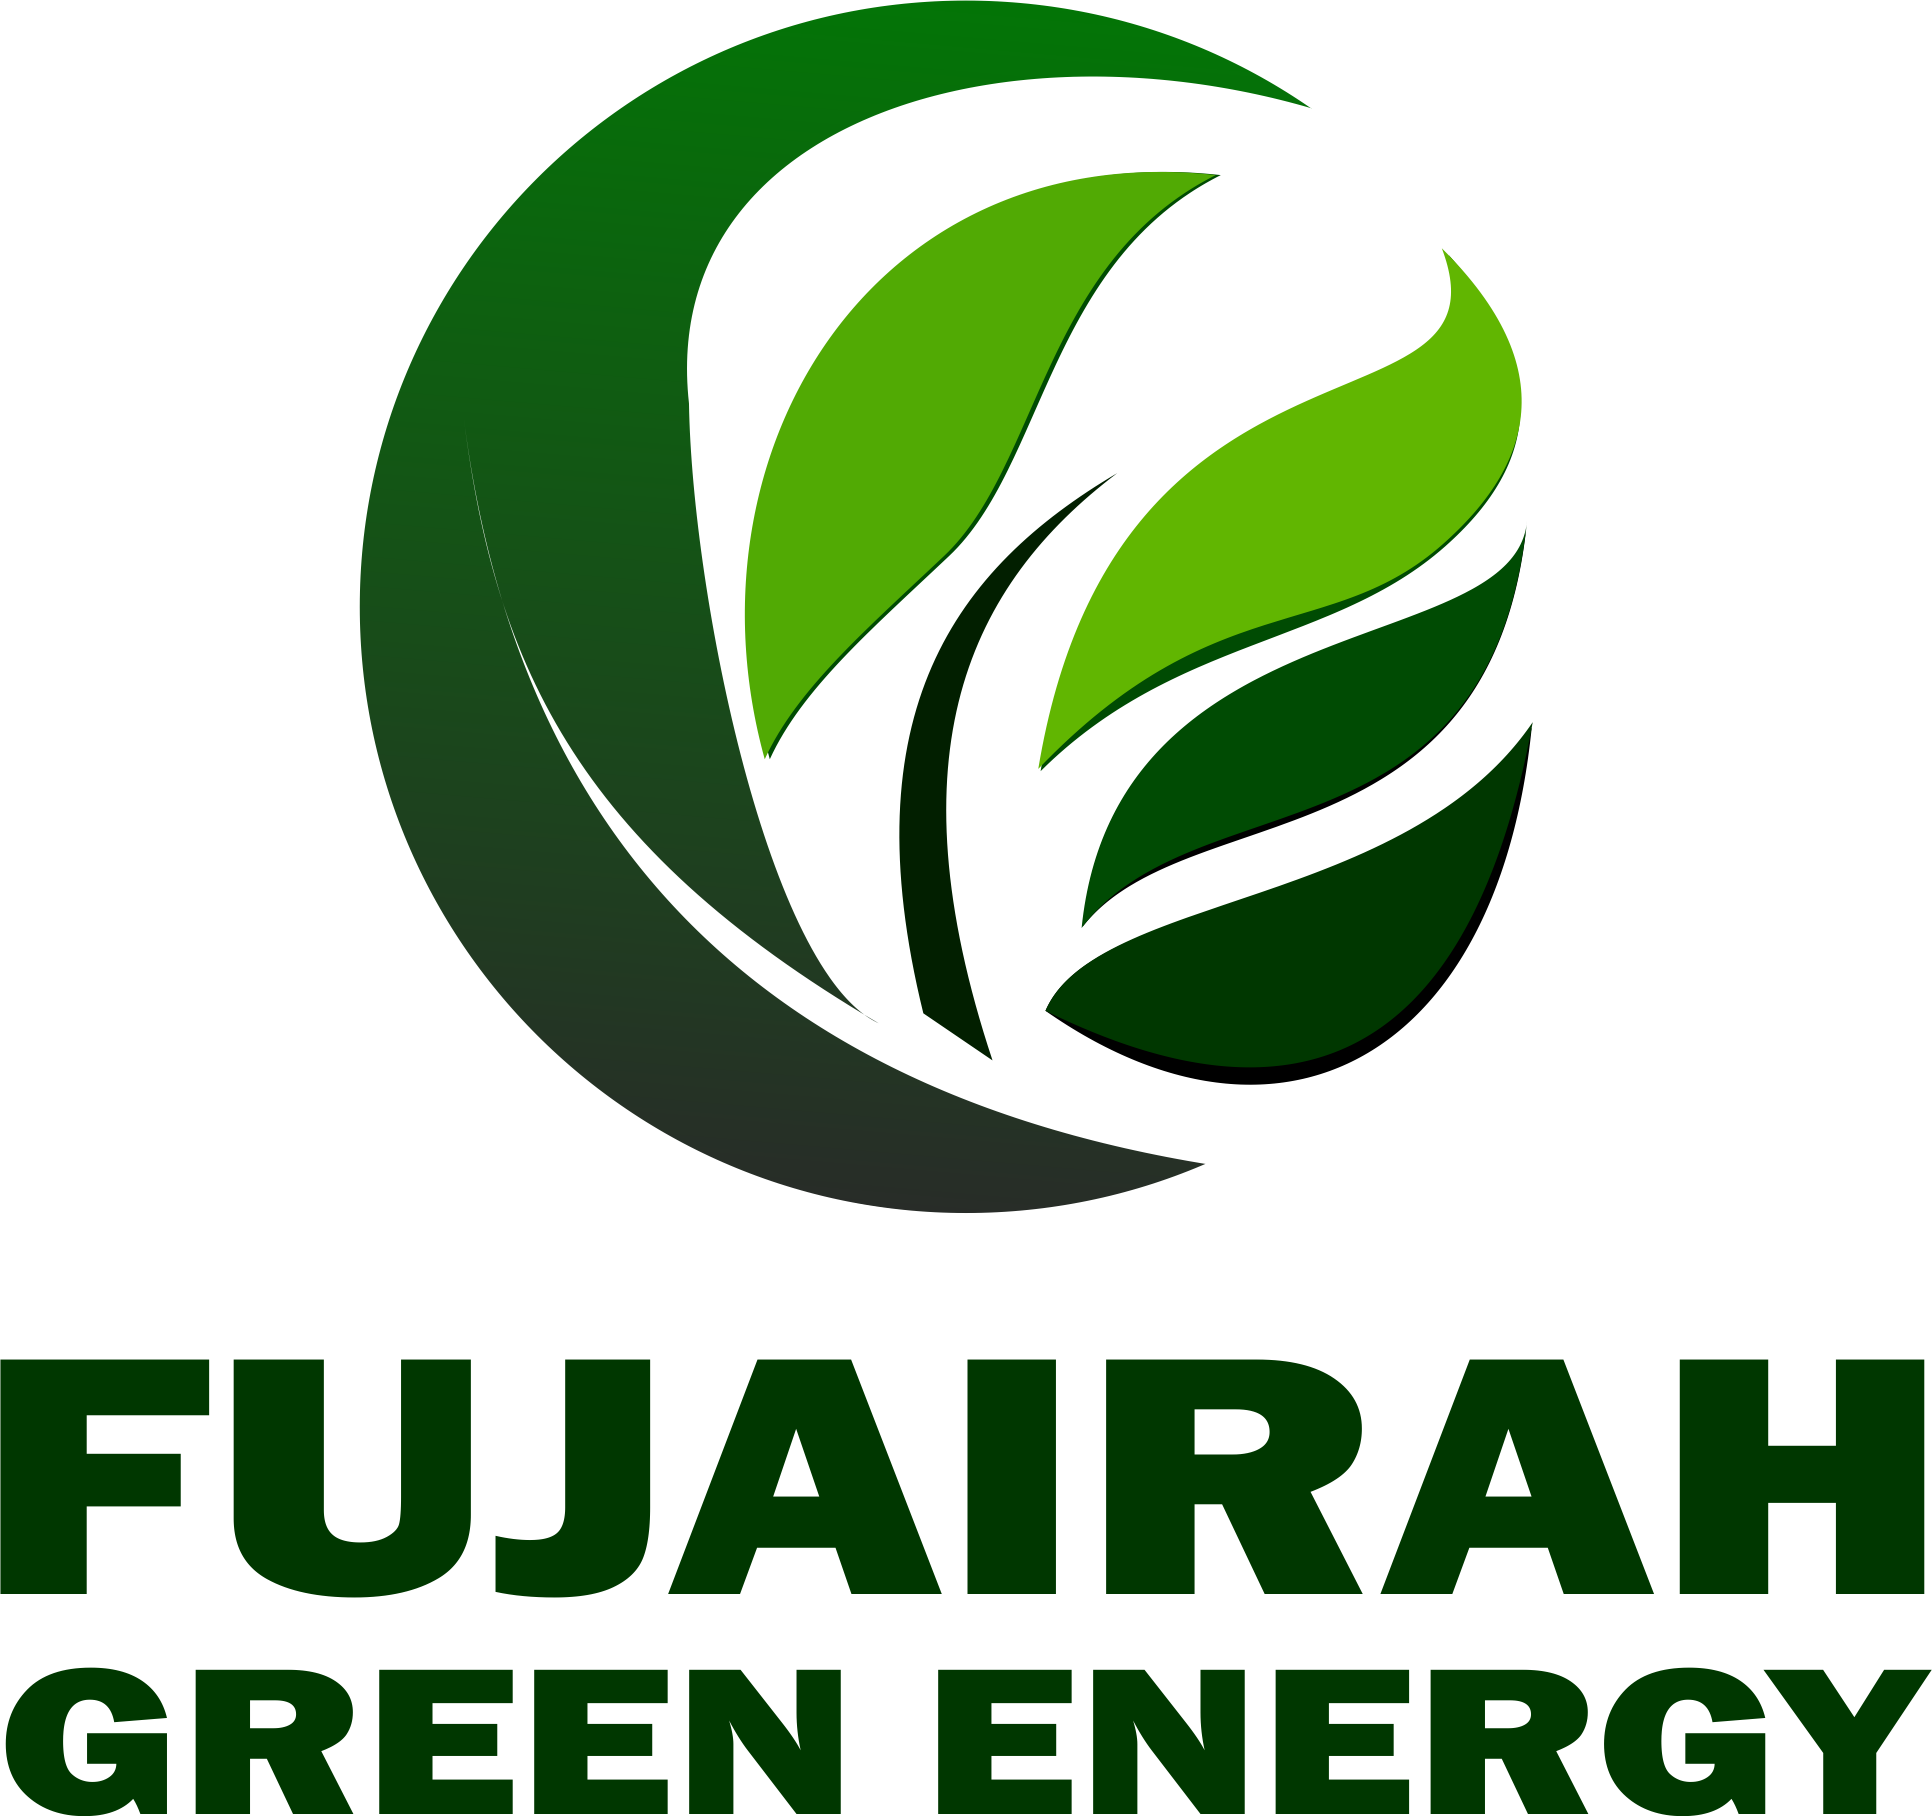 Fujairah Green Energy : Powering a Sustainable Future with Clean Green Hydrogen and Ammonia